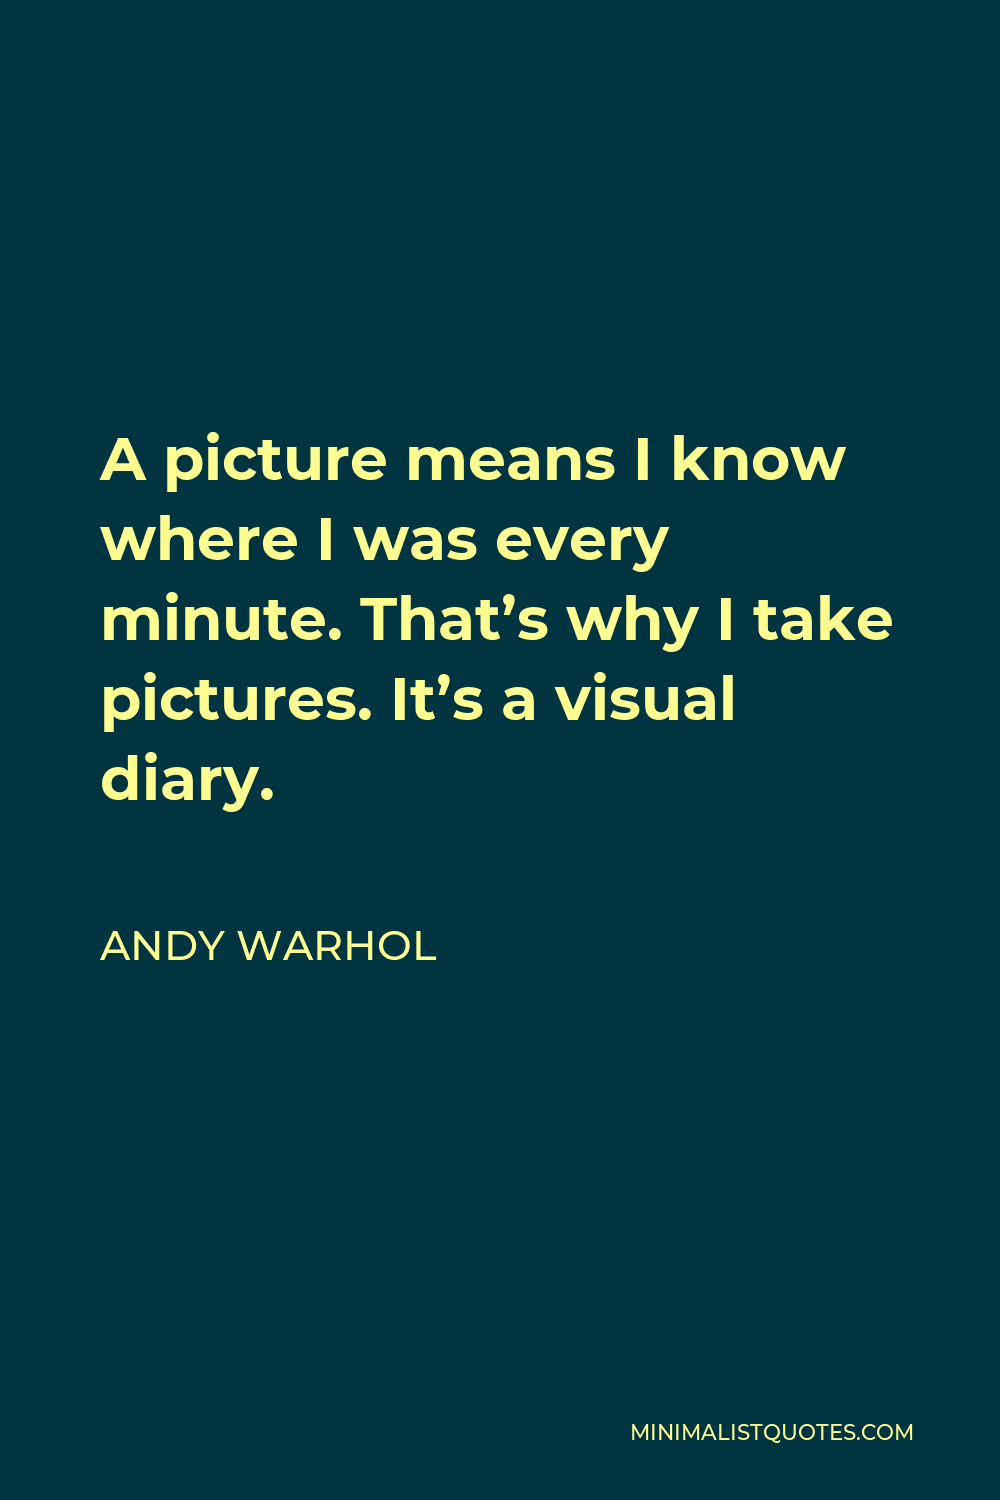 Andy Warhol Quote - A picture means I know where I was every minute. That’s why I take pictures. It’s a visual diary.